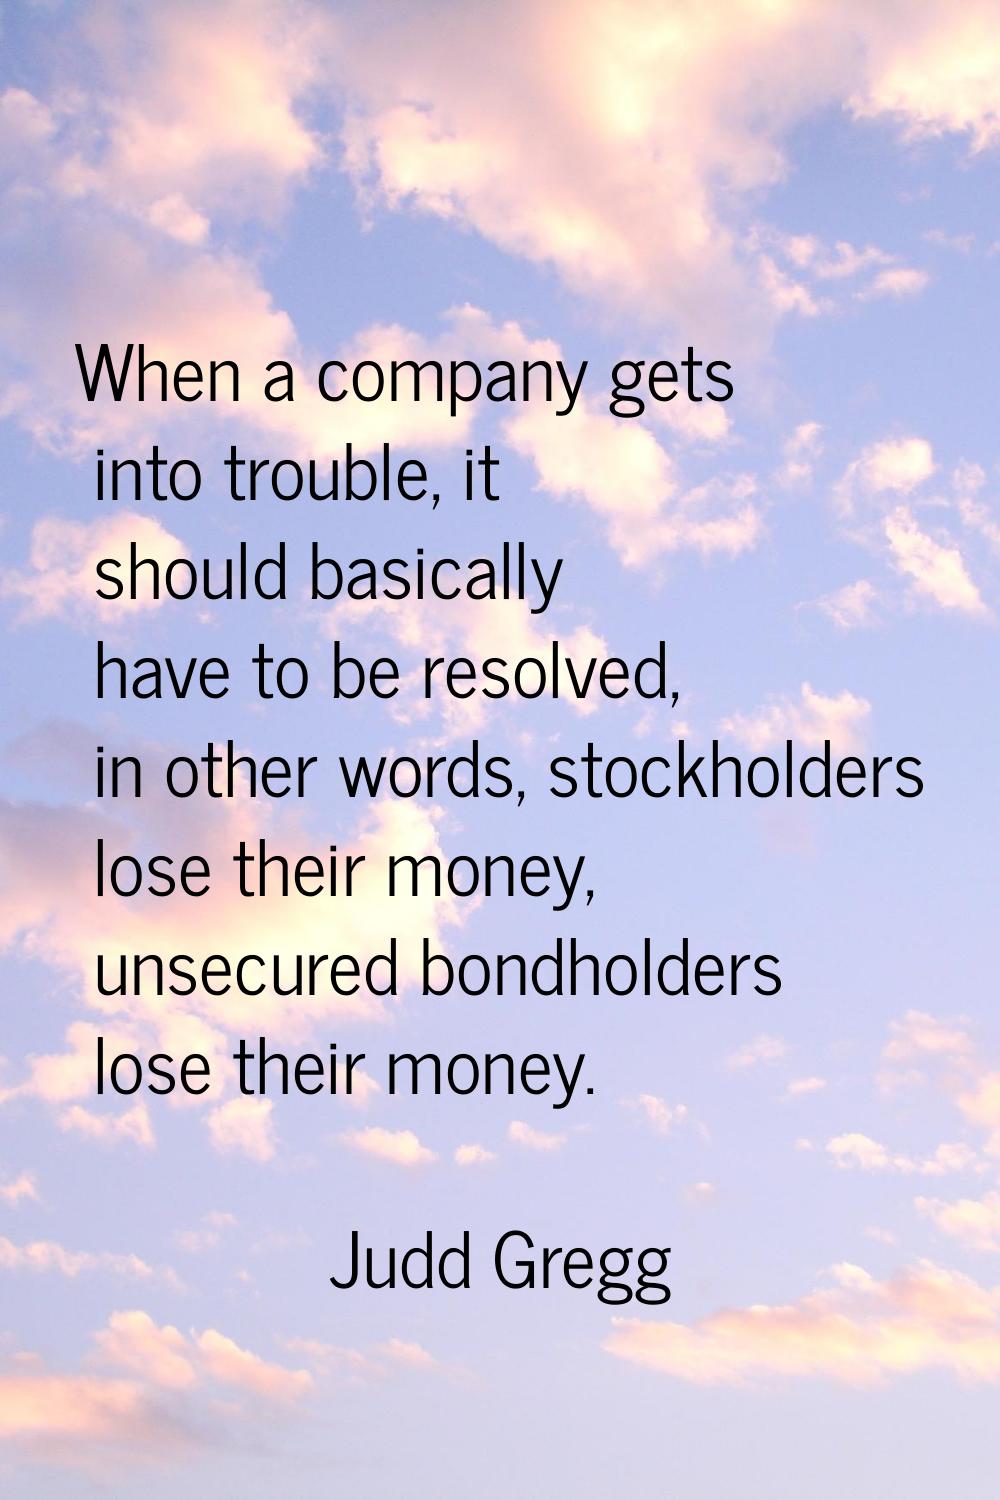 When a company gets into trouble, it should basically have to be resolved, in other words, stockhol